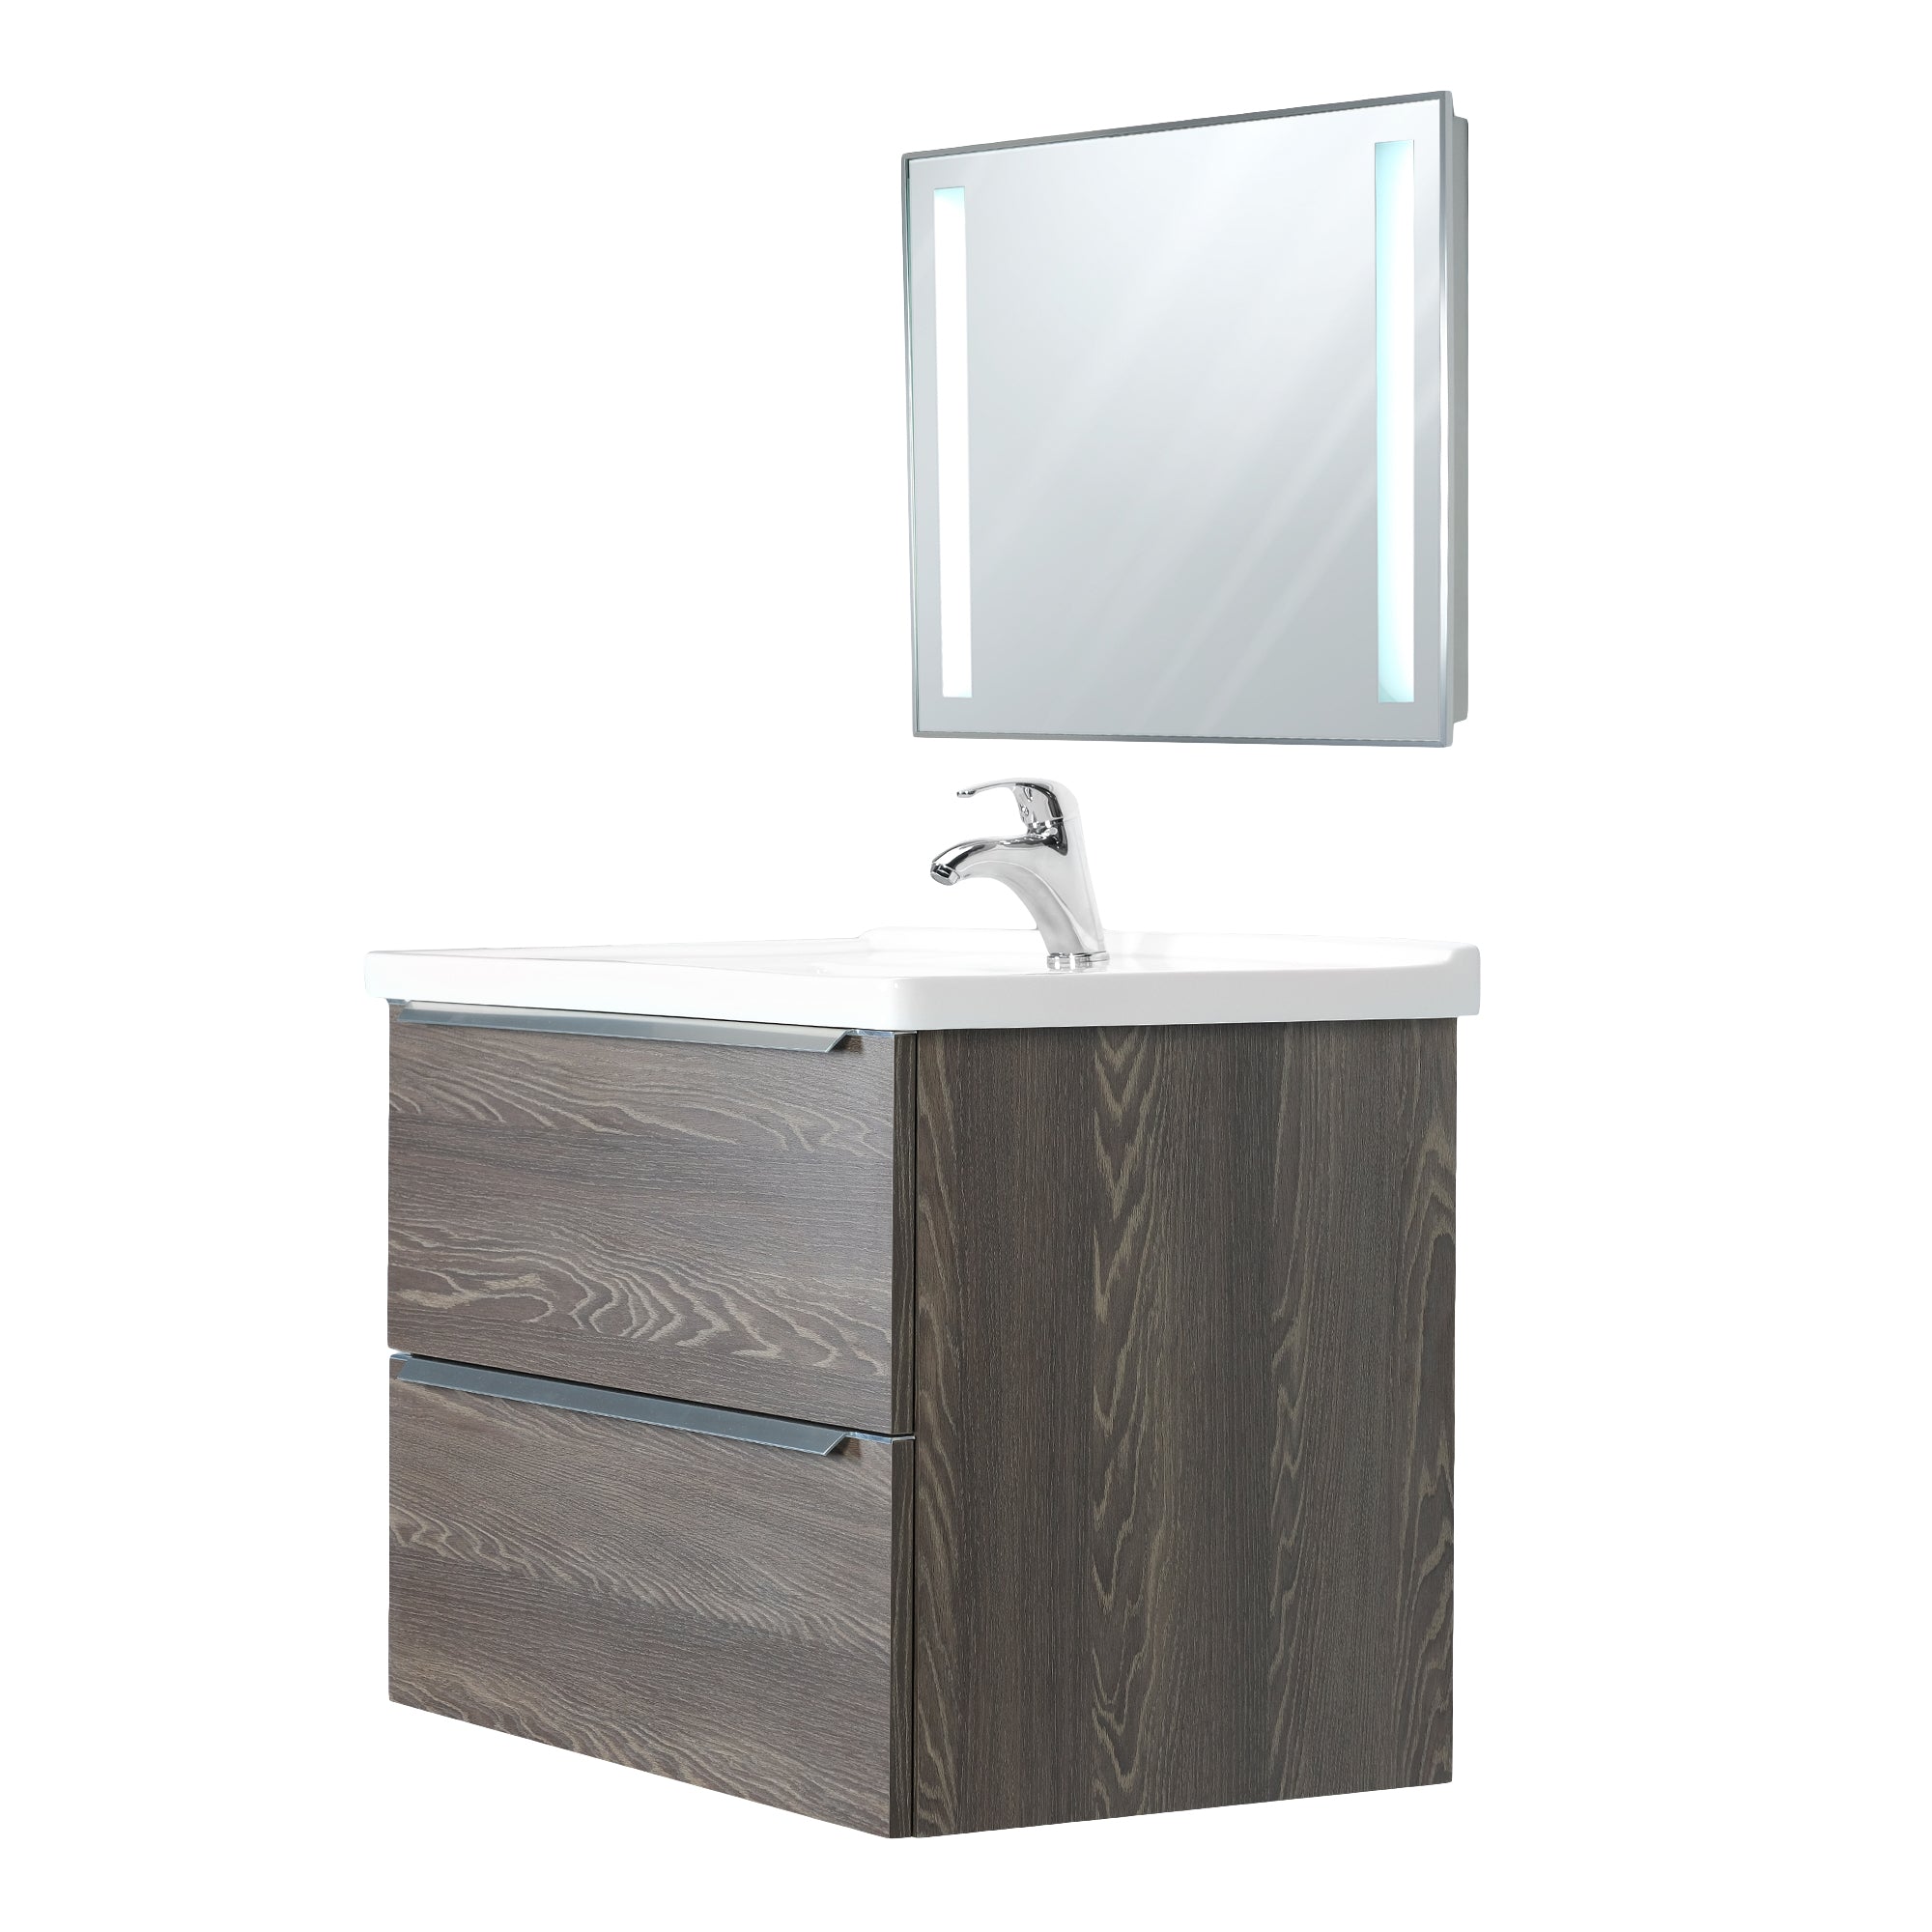 ARGENTO 32 INCH MODERN WALL MOUNT VANITY AND SINK COMBO - FOGIA GRAY